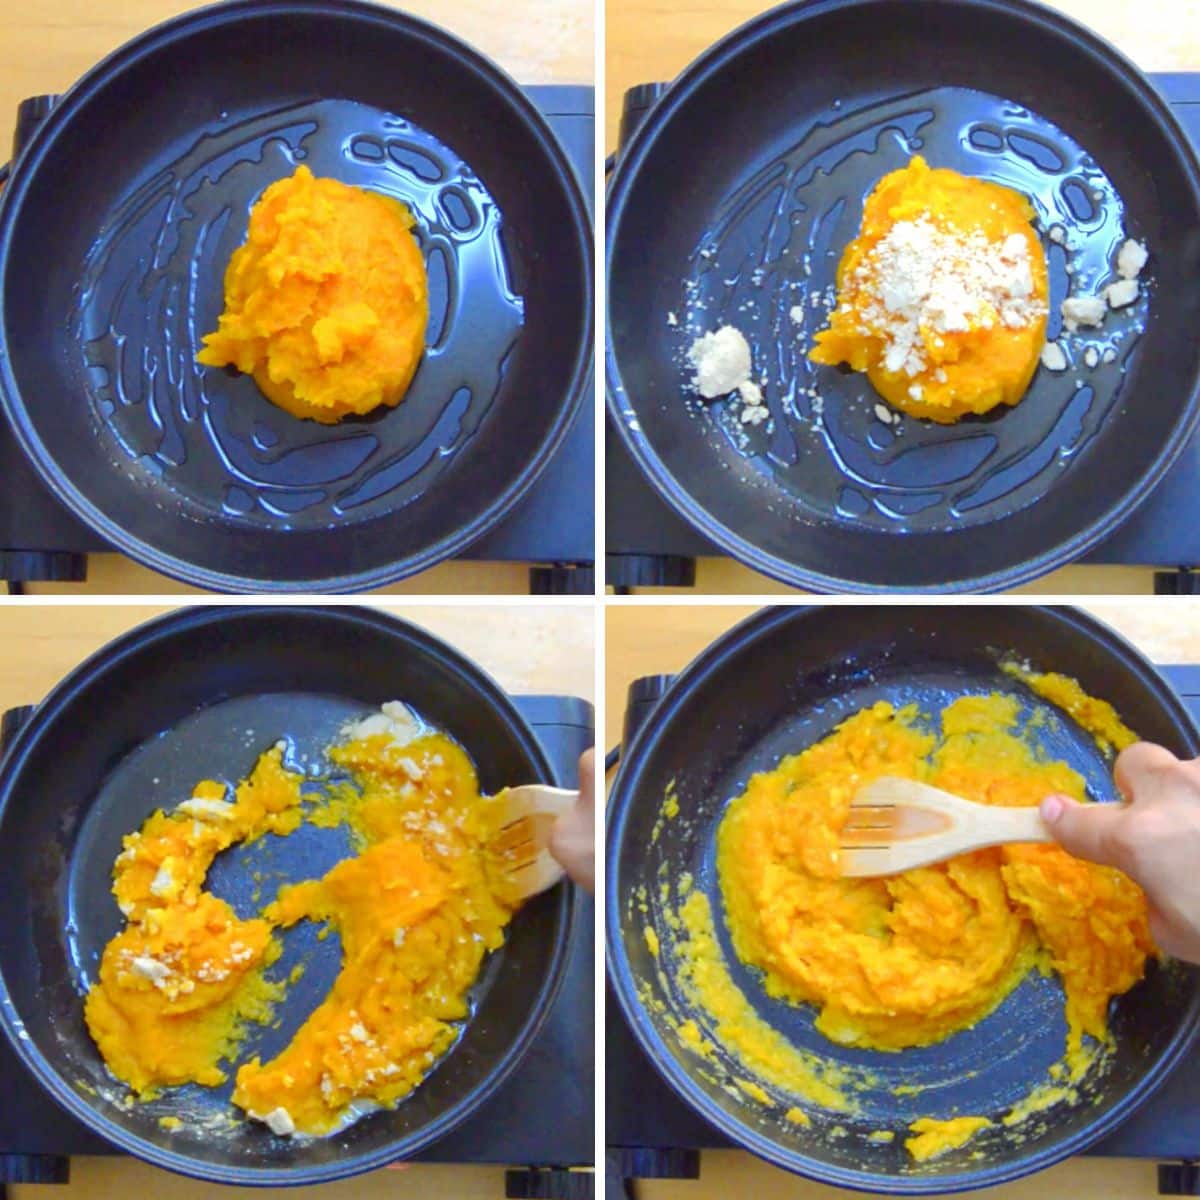 college of 4 images showing the process of combining pumpkin puree with cashew nut powder in a black pan.